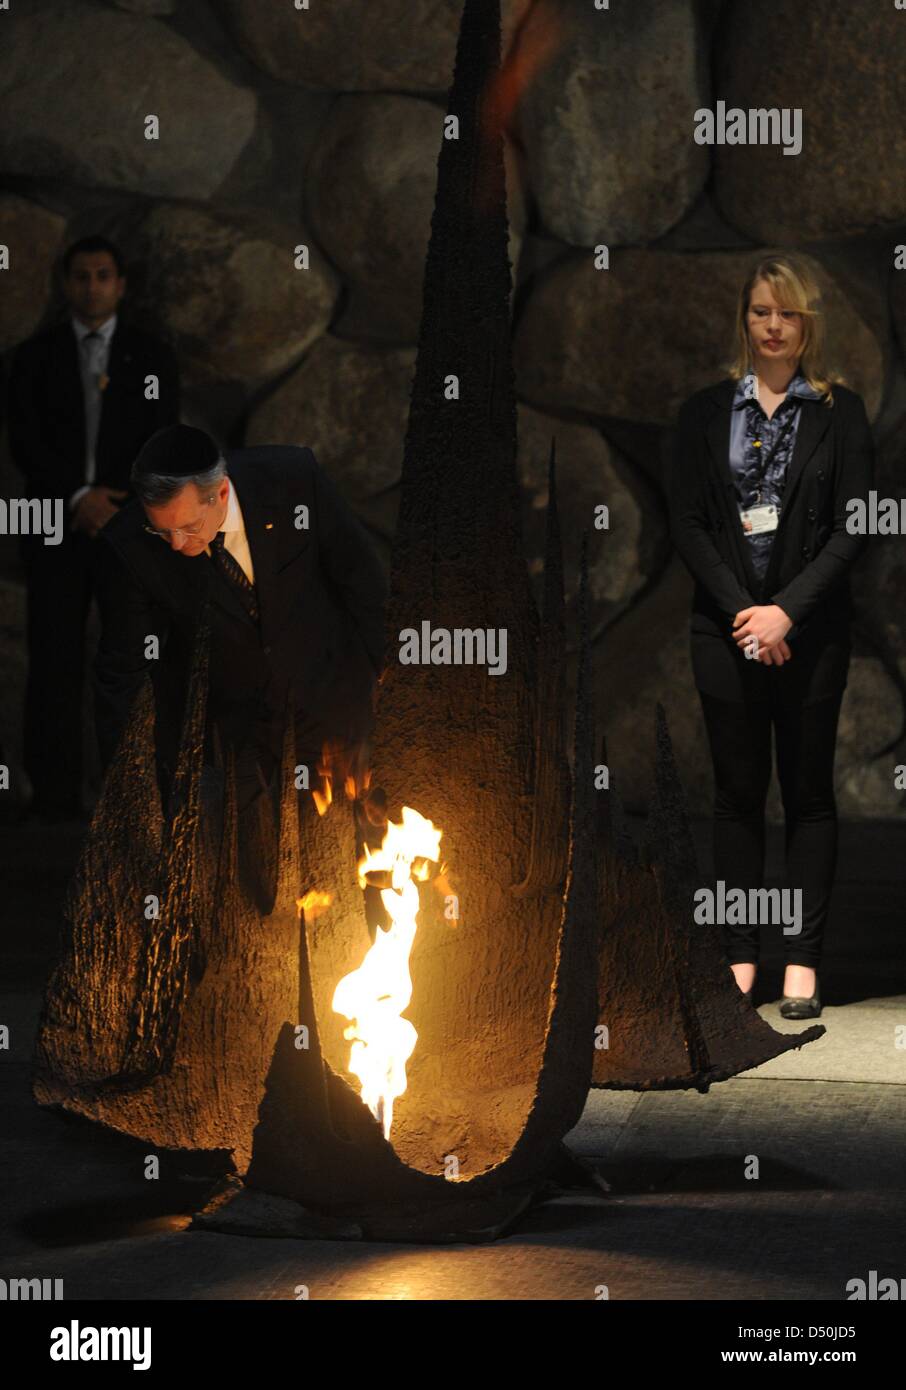 German President Wulff lights the 'eternal flame' next to his daughter Annalena Wulff at  the 'Hall of Names' at the Jad Vaschem Memorial in Jerusalem, Israel, 28 November 2010. Wulff's state visits will end in the Palestinian territories in Tuesday 20 November. Photo: Rainer Jensen Stock Photo